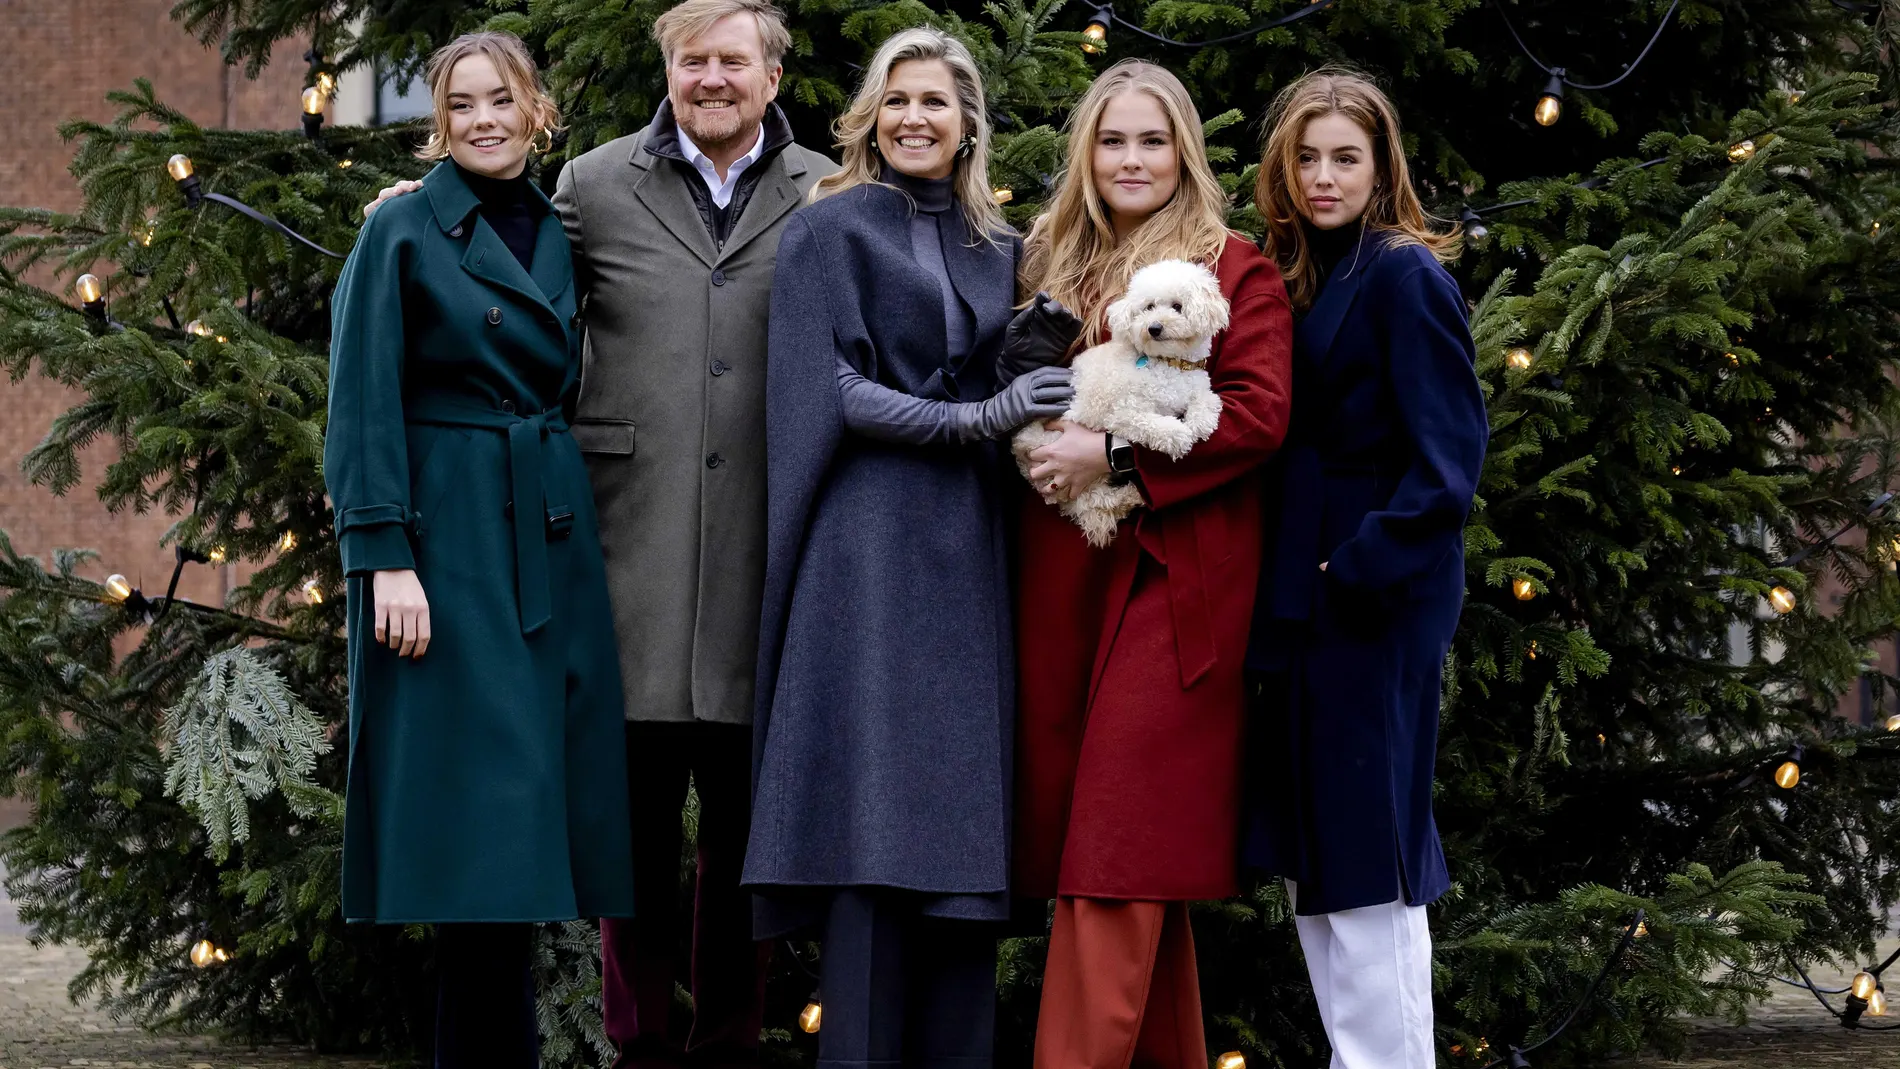 The Hague (Netherlands), 22/12/2023.- Dutch King Willem-Alexander and Queen Maxima pose together with princesses Ariane, Amalia and Alexia, and dog Mambo, during the traditional photo session of the royal family at Huis ten Bosch Palace, The Hague, The Netherlands, 22 December 2023. (Países Bajos; Holanda, La Haya) EFE/EPA/KOEN VAN WEEL 